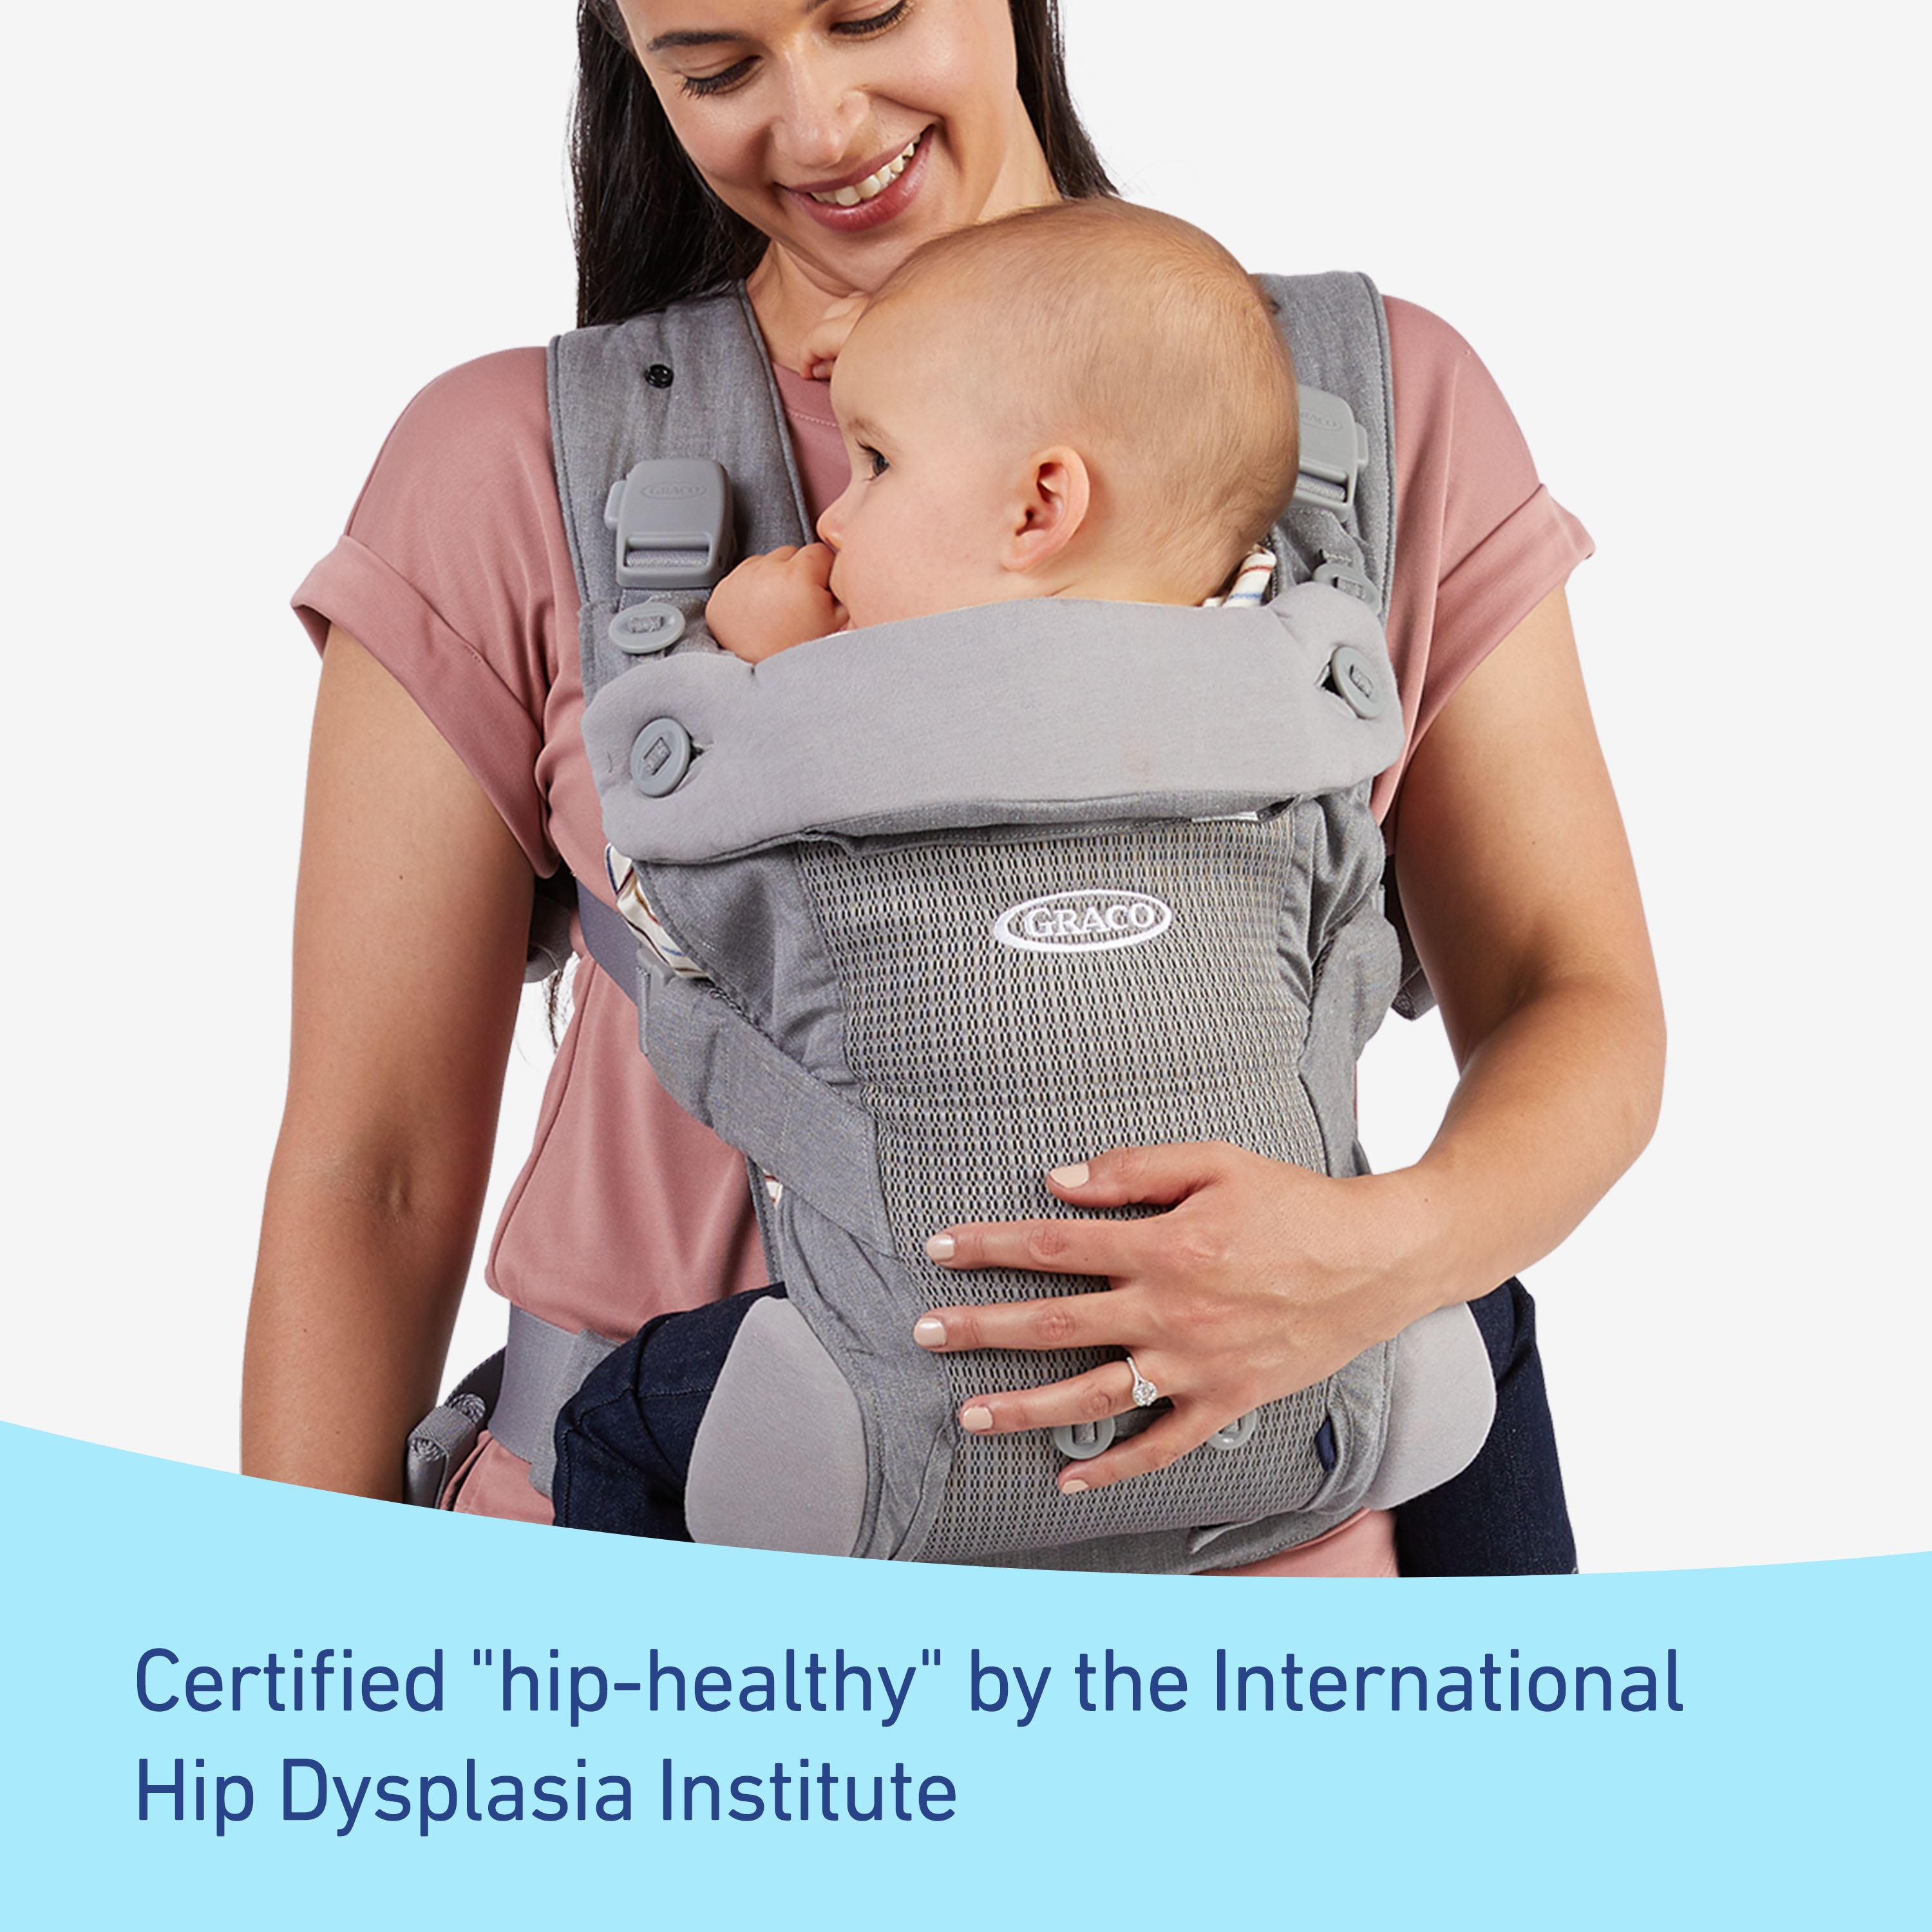 Graco Convertible Baby Carrier, Oatmeal, One Size Fits All - image 3 of 8